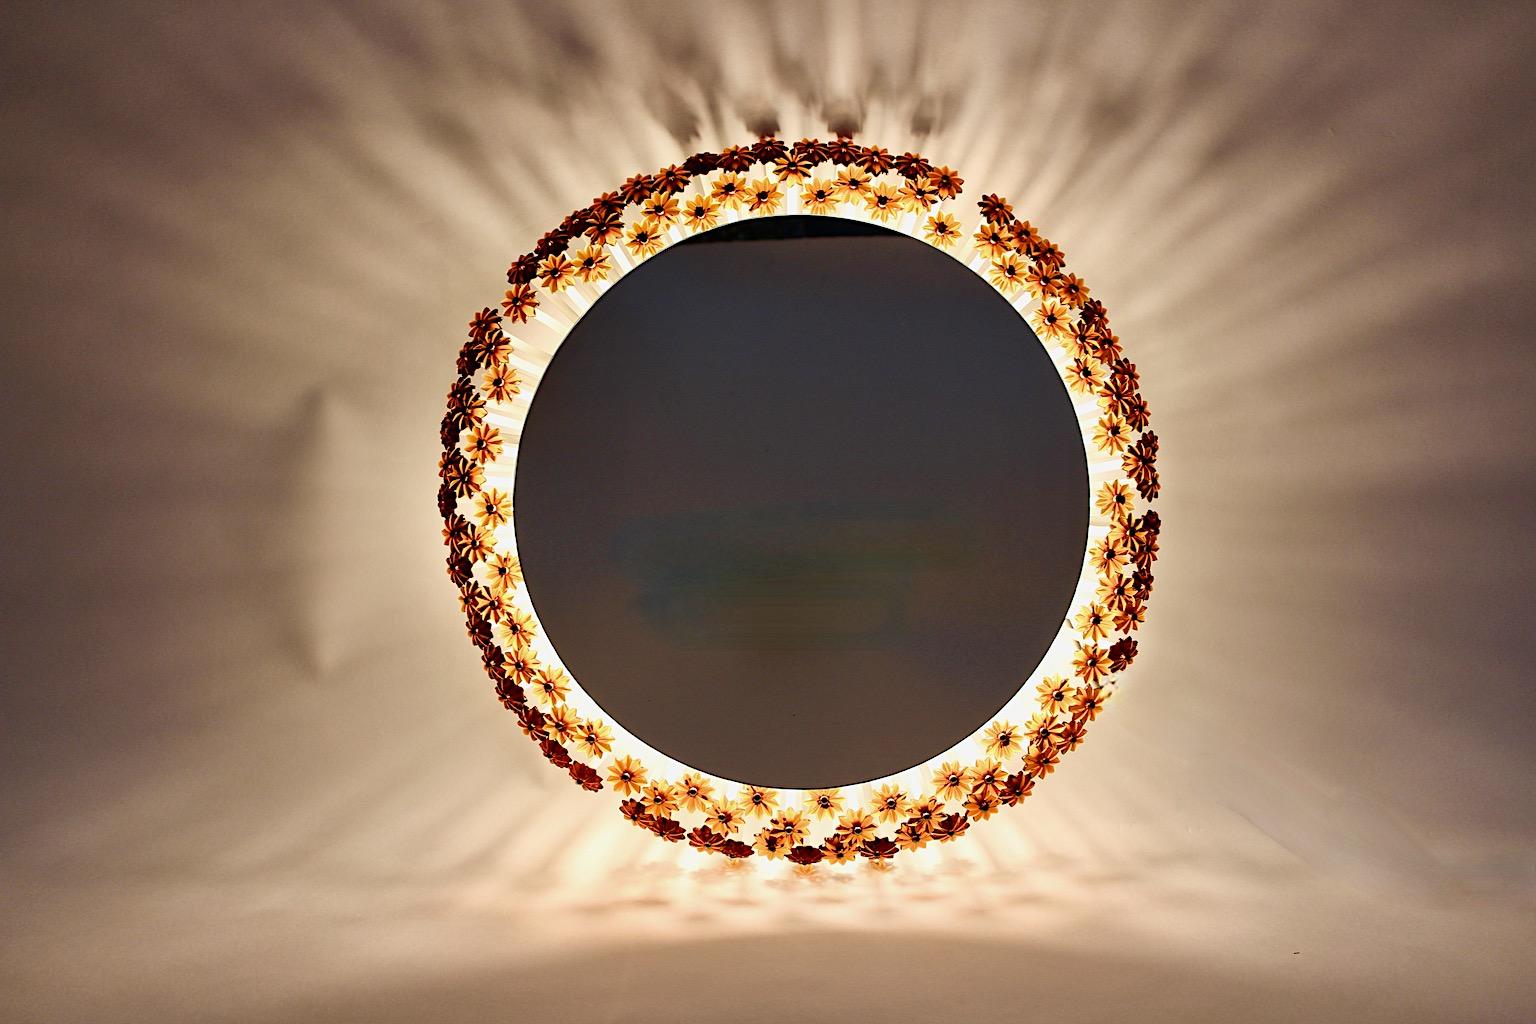 Mid-Century Modern vintage circular like wall mirror backlit framed with lucite flowers in amber color tone by Emil Stejnar 1950s Austria.
The wall mirror is lighted with three E 14 sockets. Amazing lucite flowers work in soft brown luscious amber